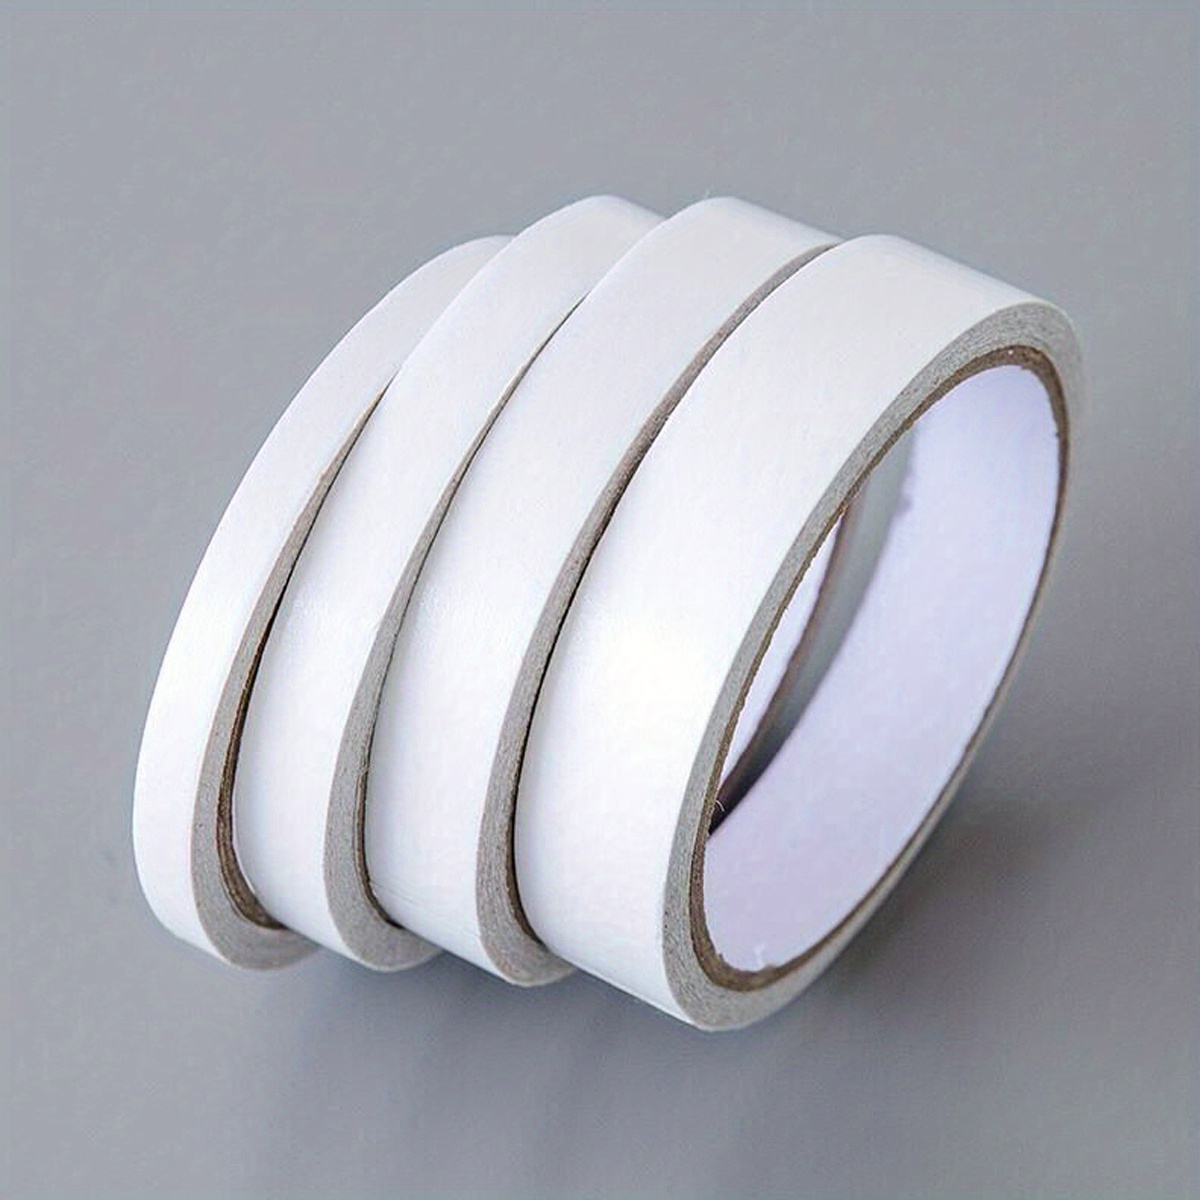 double sided tape for arts, crafts